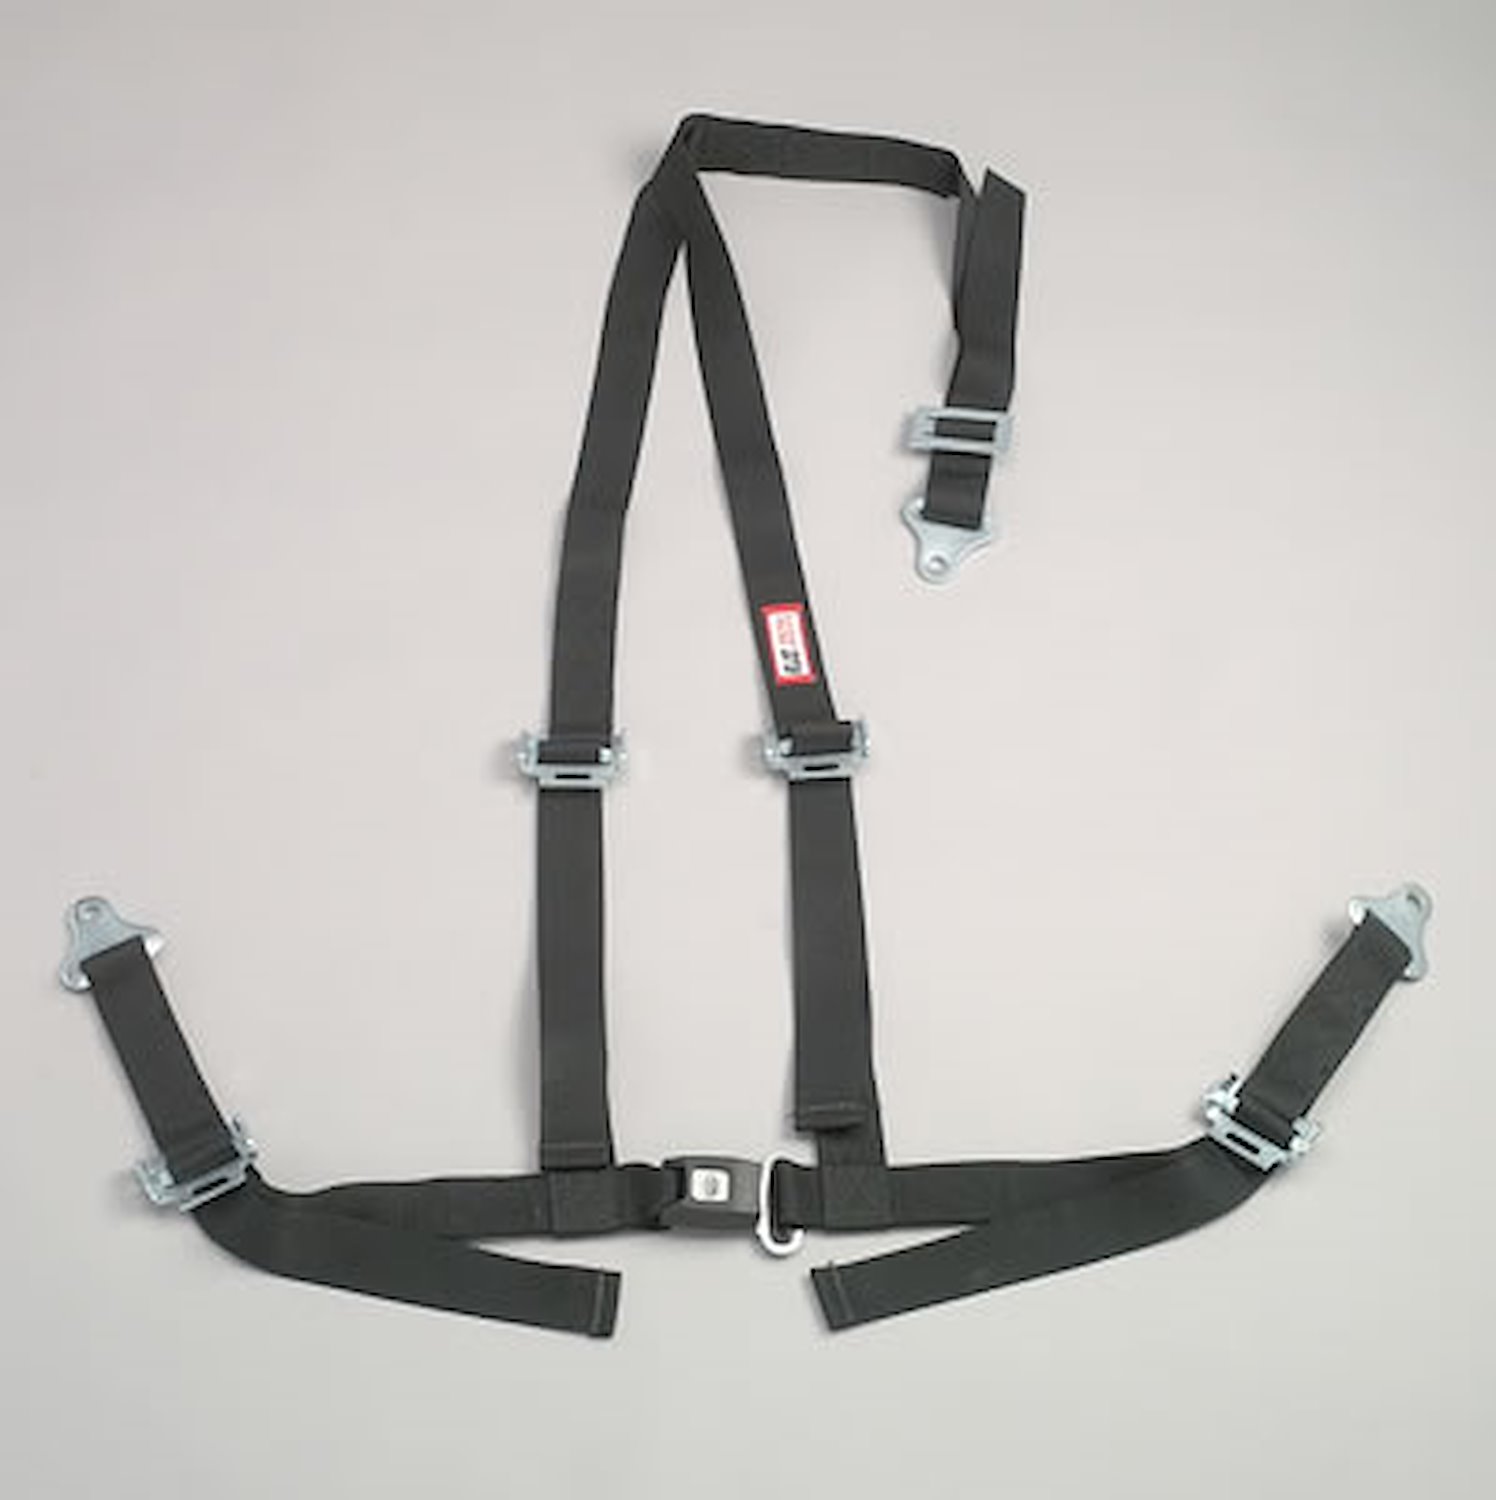 NON-SFI B&T HARNESS 2 PULL UP Lap Belt SNAP 2 S. H. Individual FLOOR Mount WRAP/SNAP w/STERNUM STRAP OD GREEN